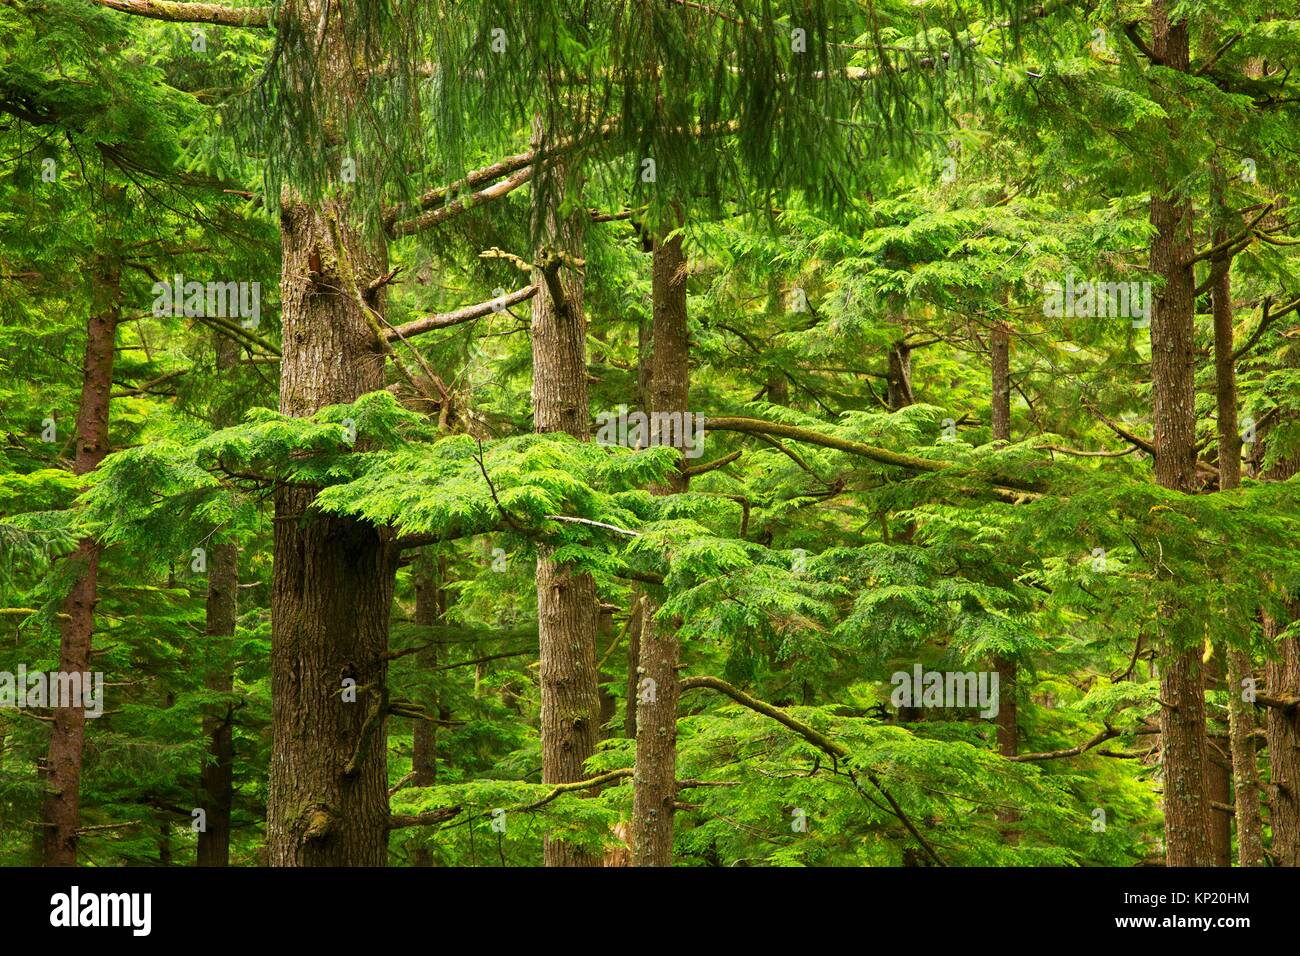 Sitka spruce (Picea sitchensis) - Western hemlock ancient forest, Oswald West State Park, Oregon. Stock Photo